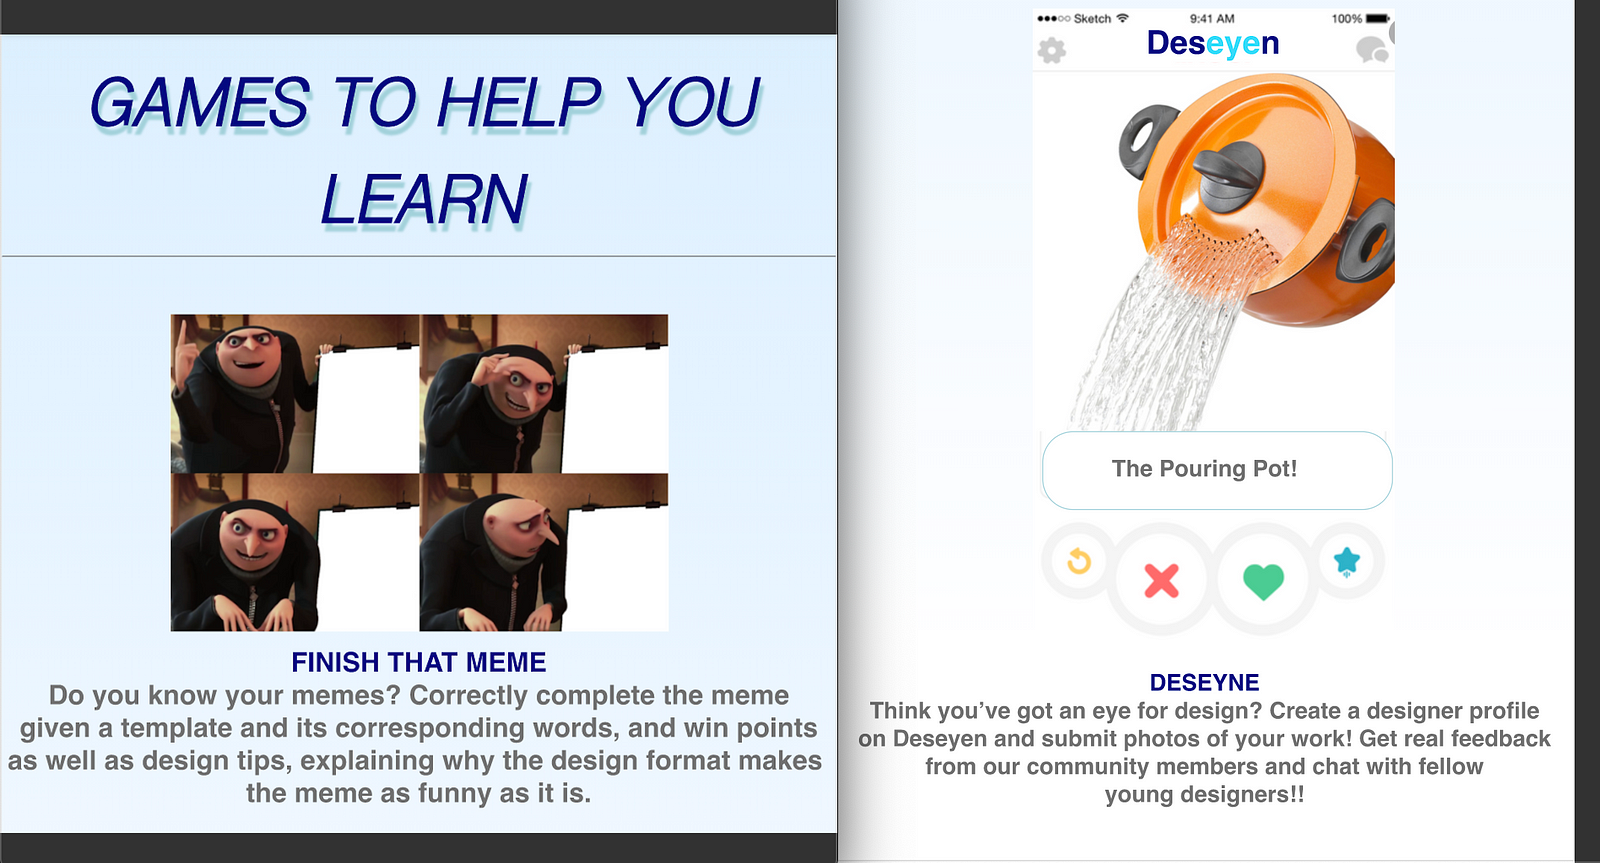 Design High App: Game “Finish that Meme” and a version of Tinder where you swipe right or left on different designs